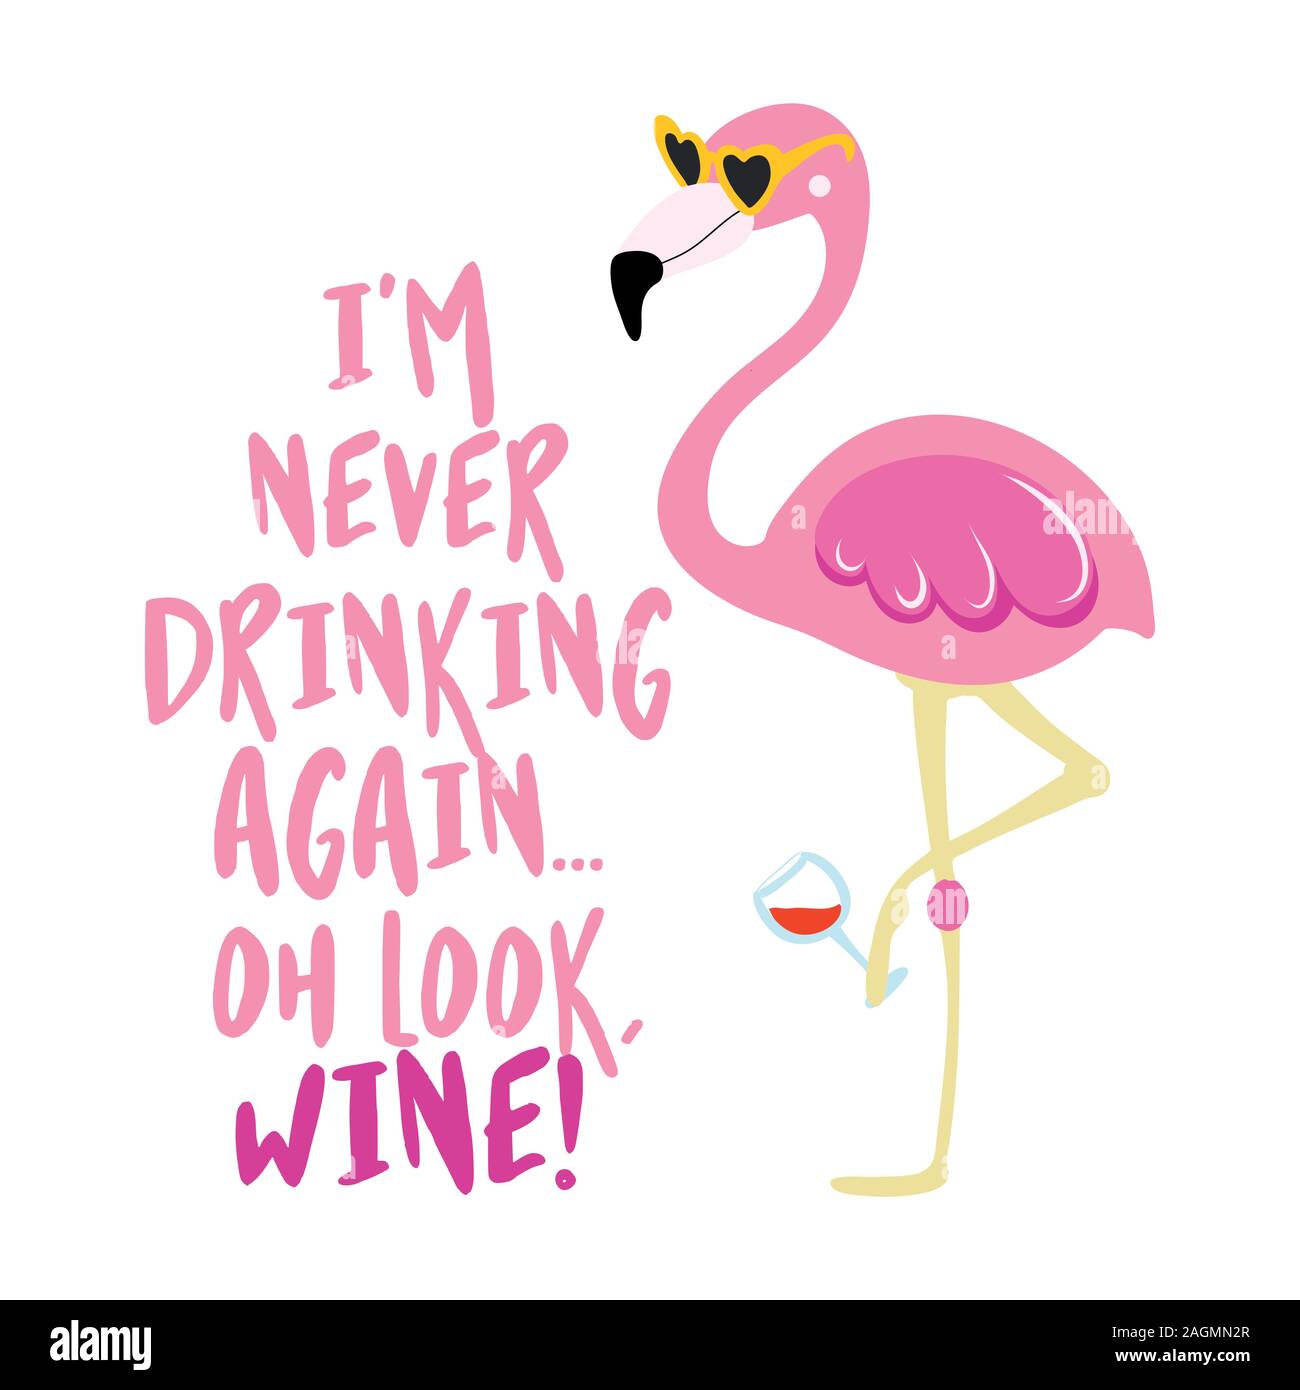 I am never drinking again. Oh look, wine! - Cute phrase with hangover flamingo girl. Hand drawn lettering for Xmas greetings cards, invitations. Good Stock Vector